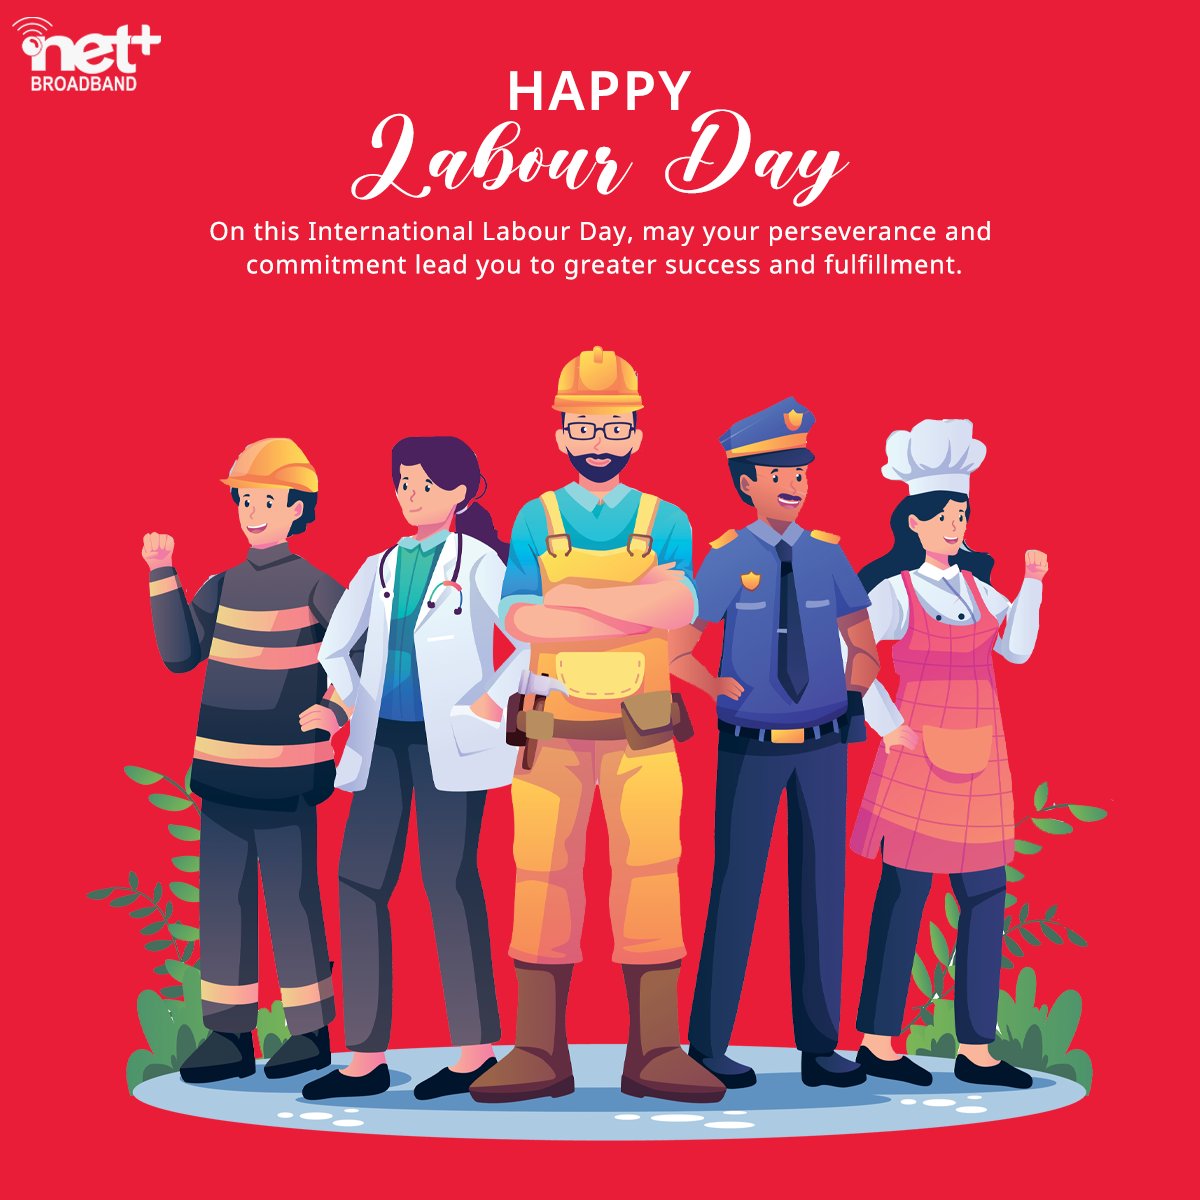 On this International Labour Day, may your perseverance and commitment lead you to greater success and fulfillment. #labour #wishes #day #labor #workout #hardwork #teamwork #business #netplus